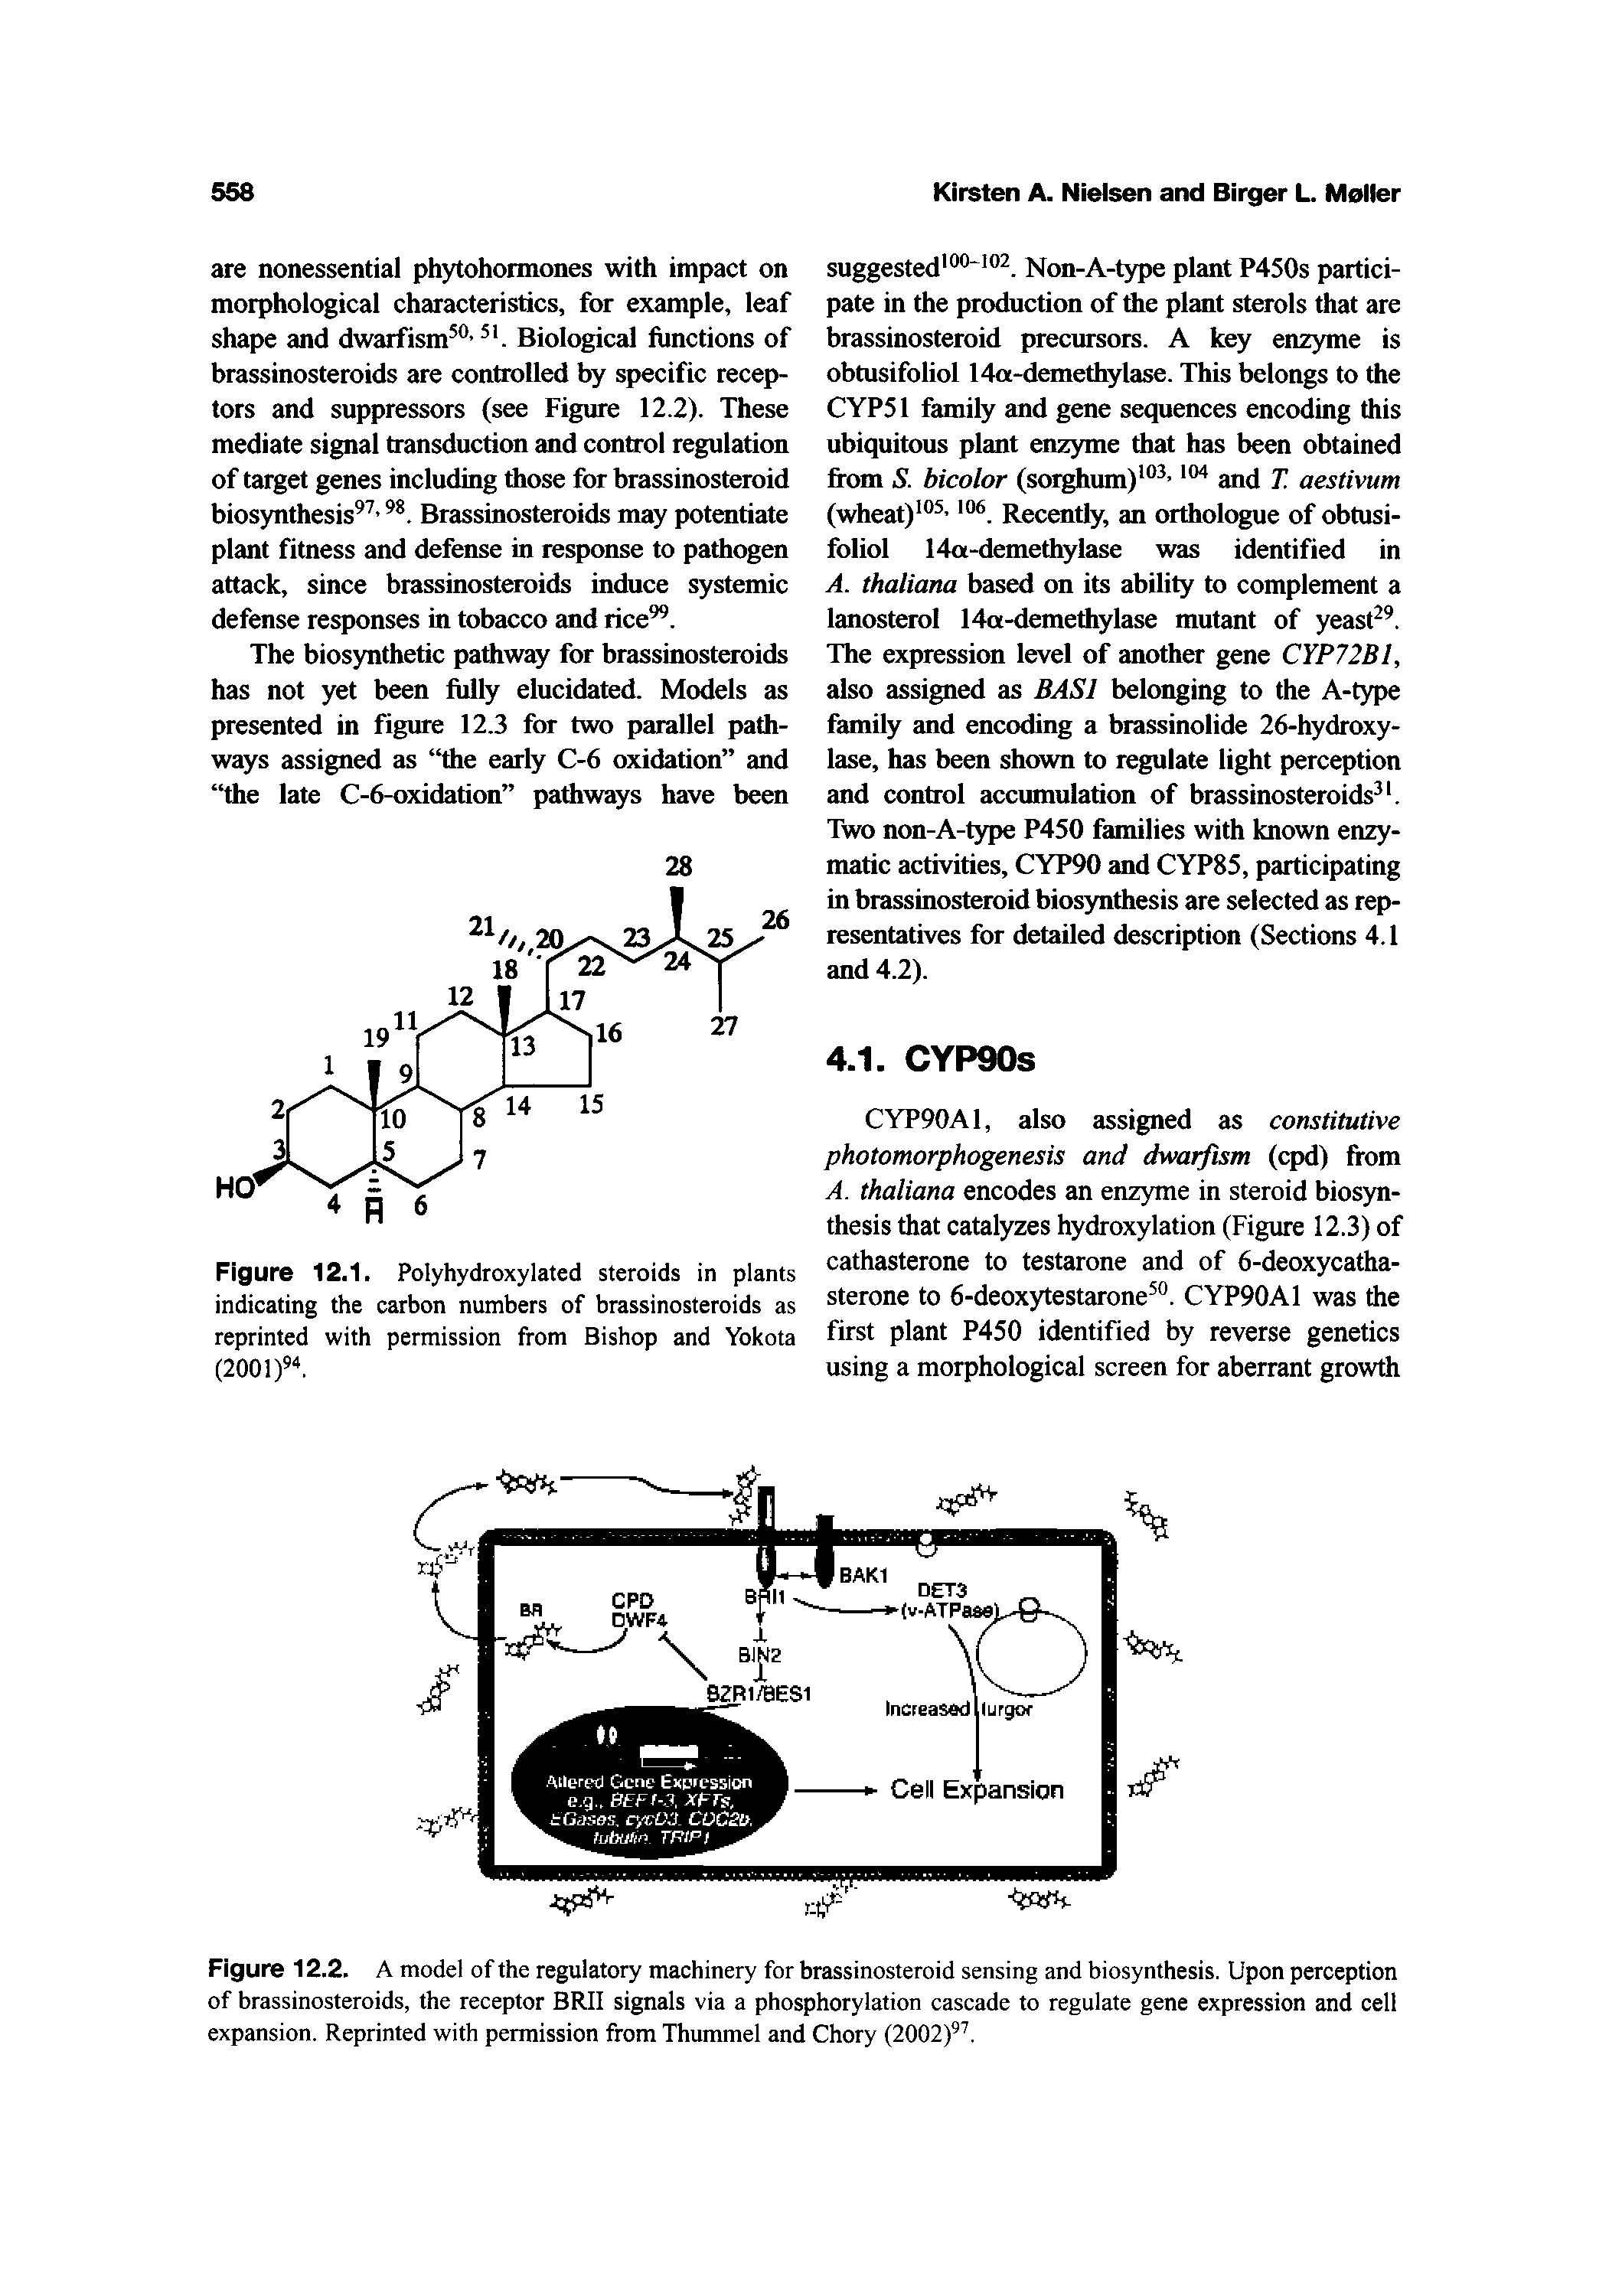 Figure 12.2. A model of the regulatory machinery for brassinosteroid sensing and biosynthesis. Upon perception of brassinosteroids, the receptor BRII signals via a phosphorylation cascade to regulate gene expression and cell expansion. Reprinted with permission from Thummel and Chory (2002) .